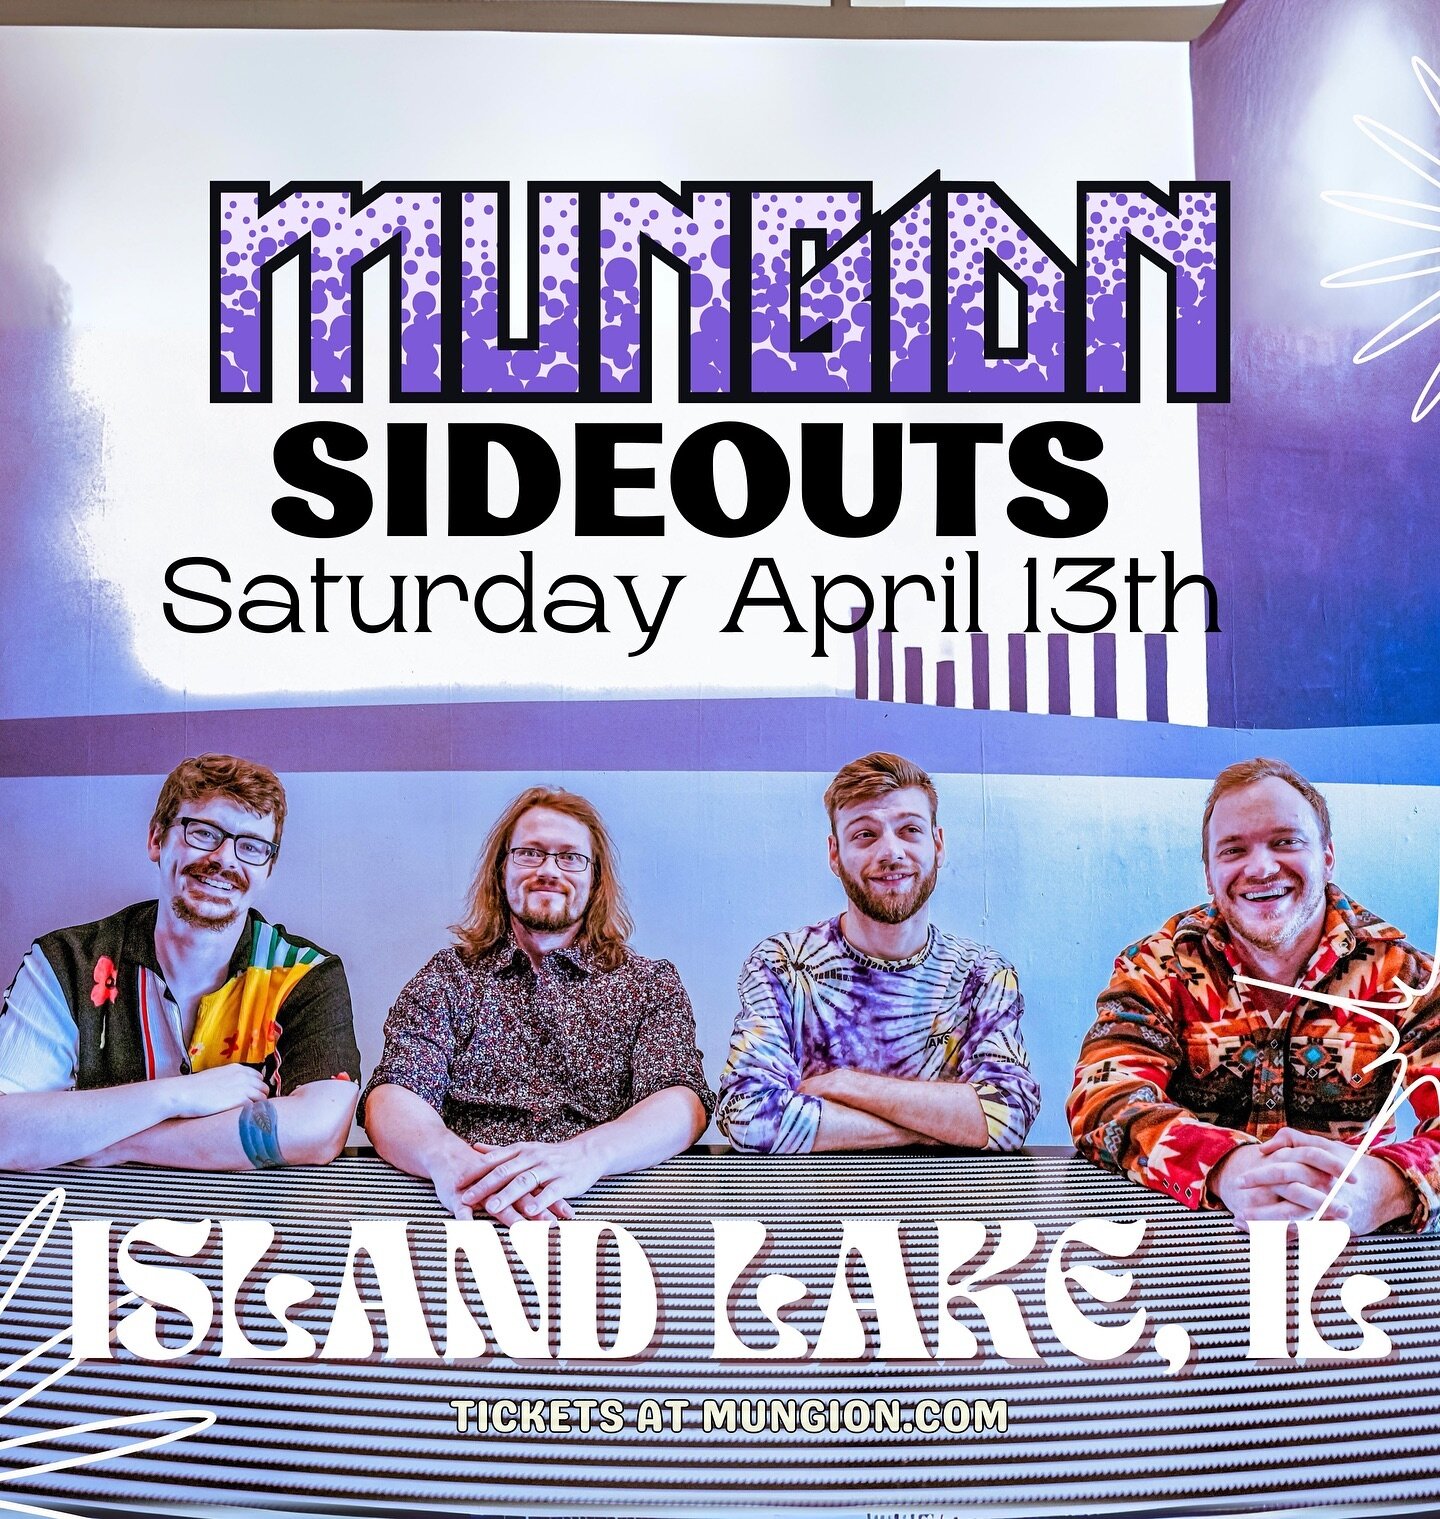 We ain&rsquo;t fooling! We&rsquo;re thrilled to be back at Sideouts in just a few weeks. Saturday April 13. You should probably join us. 🚀 @sideoutssportstavern